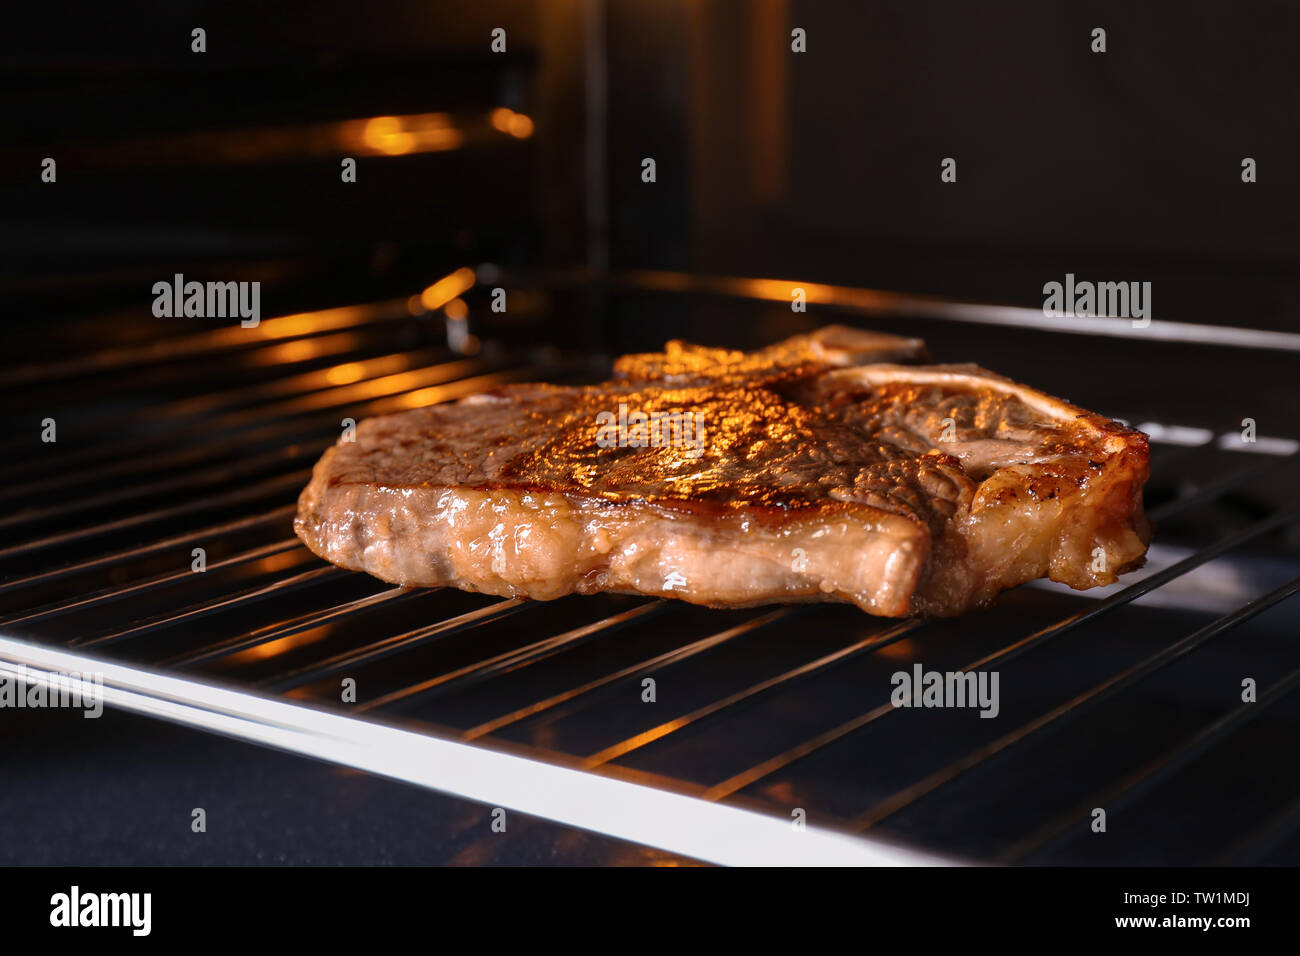 Tasty grilled steak in oven Stock Photo - Alamy